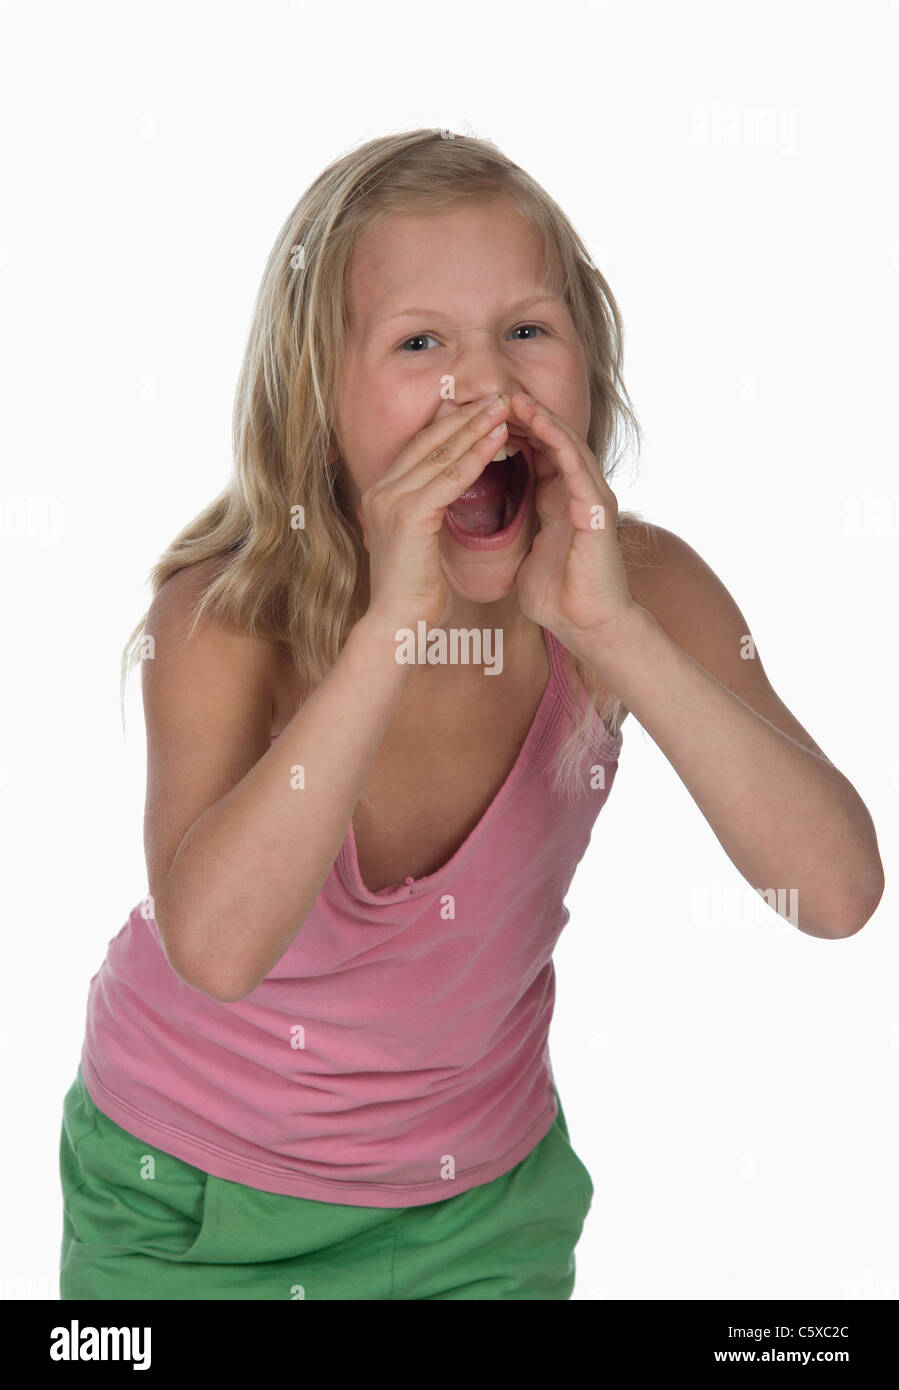 Portrait of a girl (10-11) shouting Stock Photo